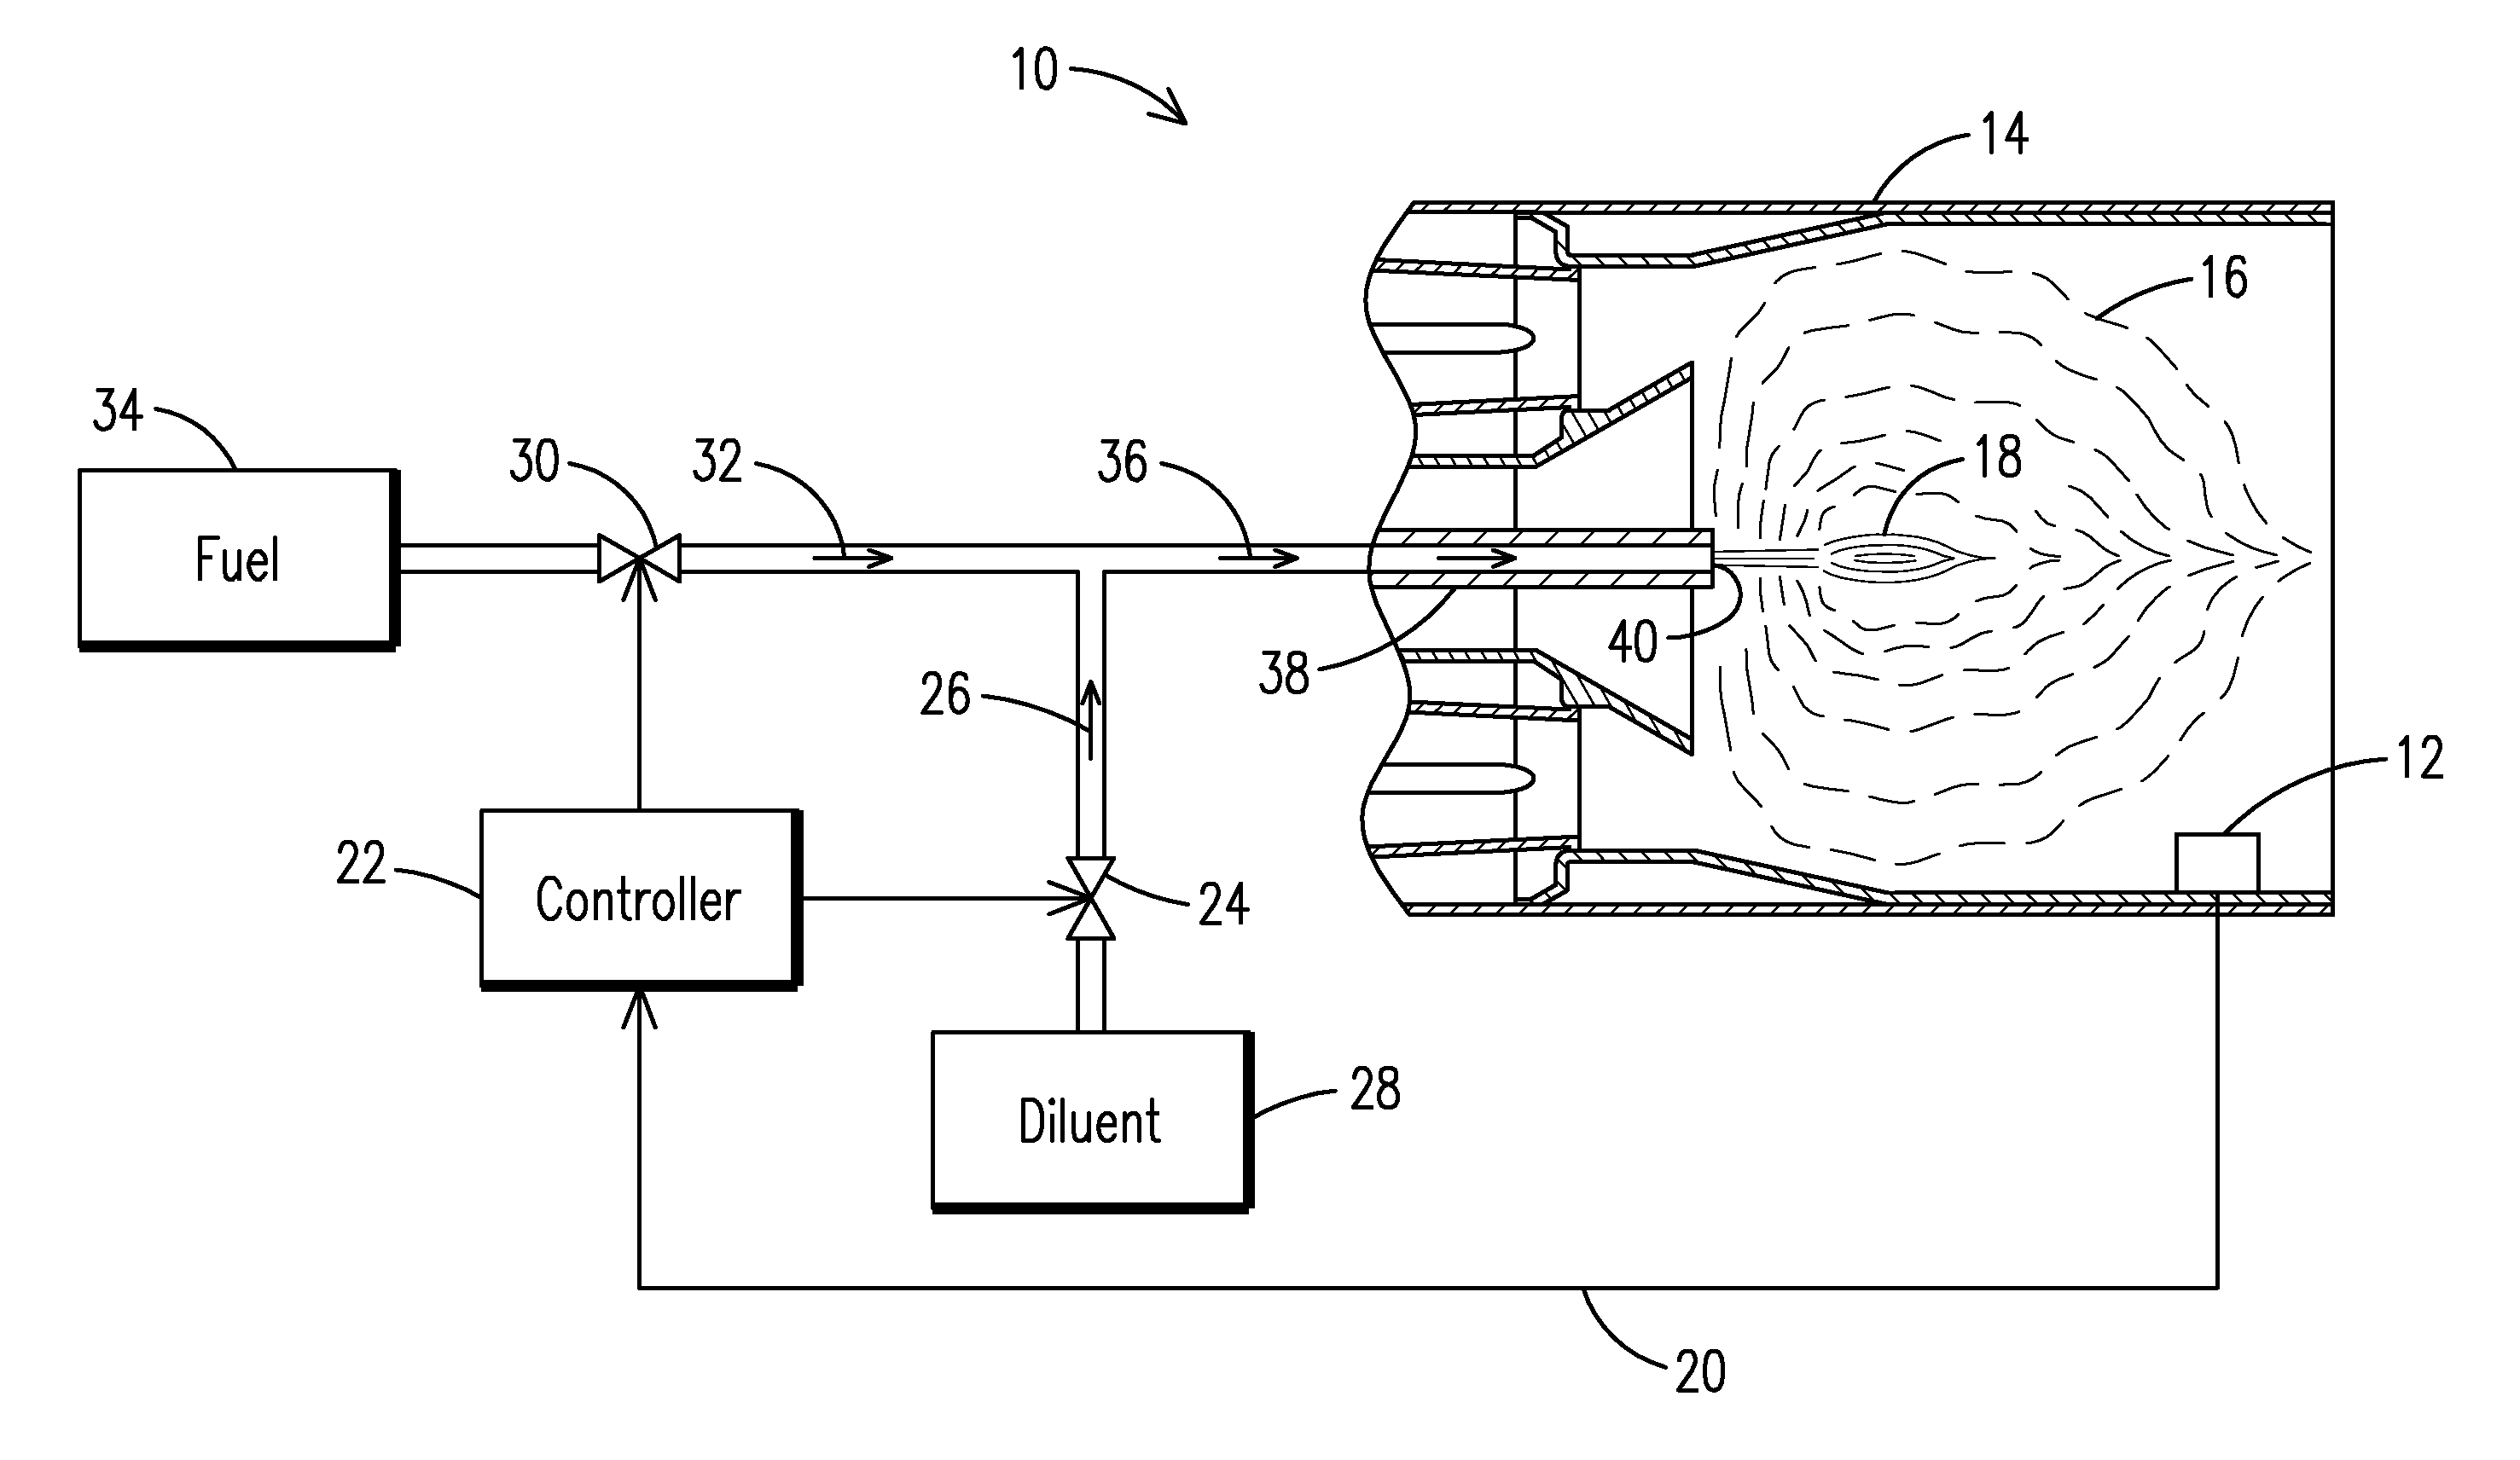 Utilizing a diluent to lower combustion instabilities in a gas turbine engine